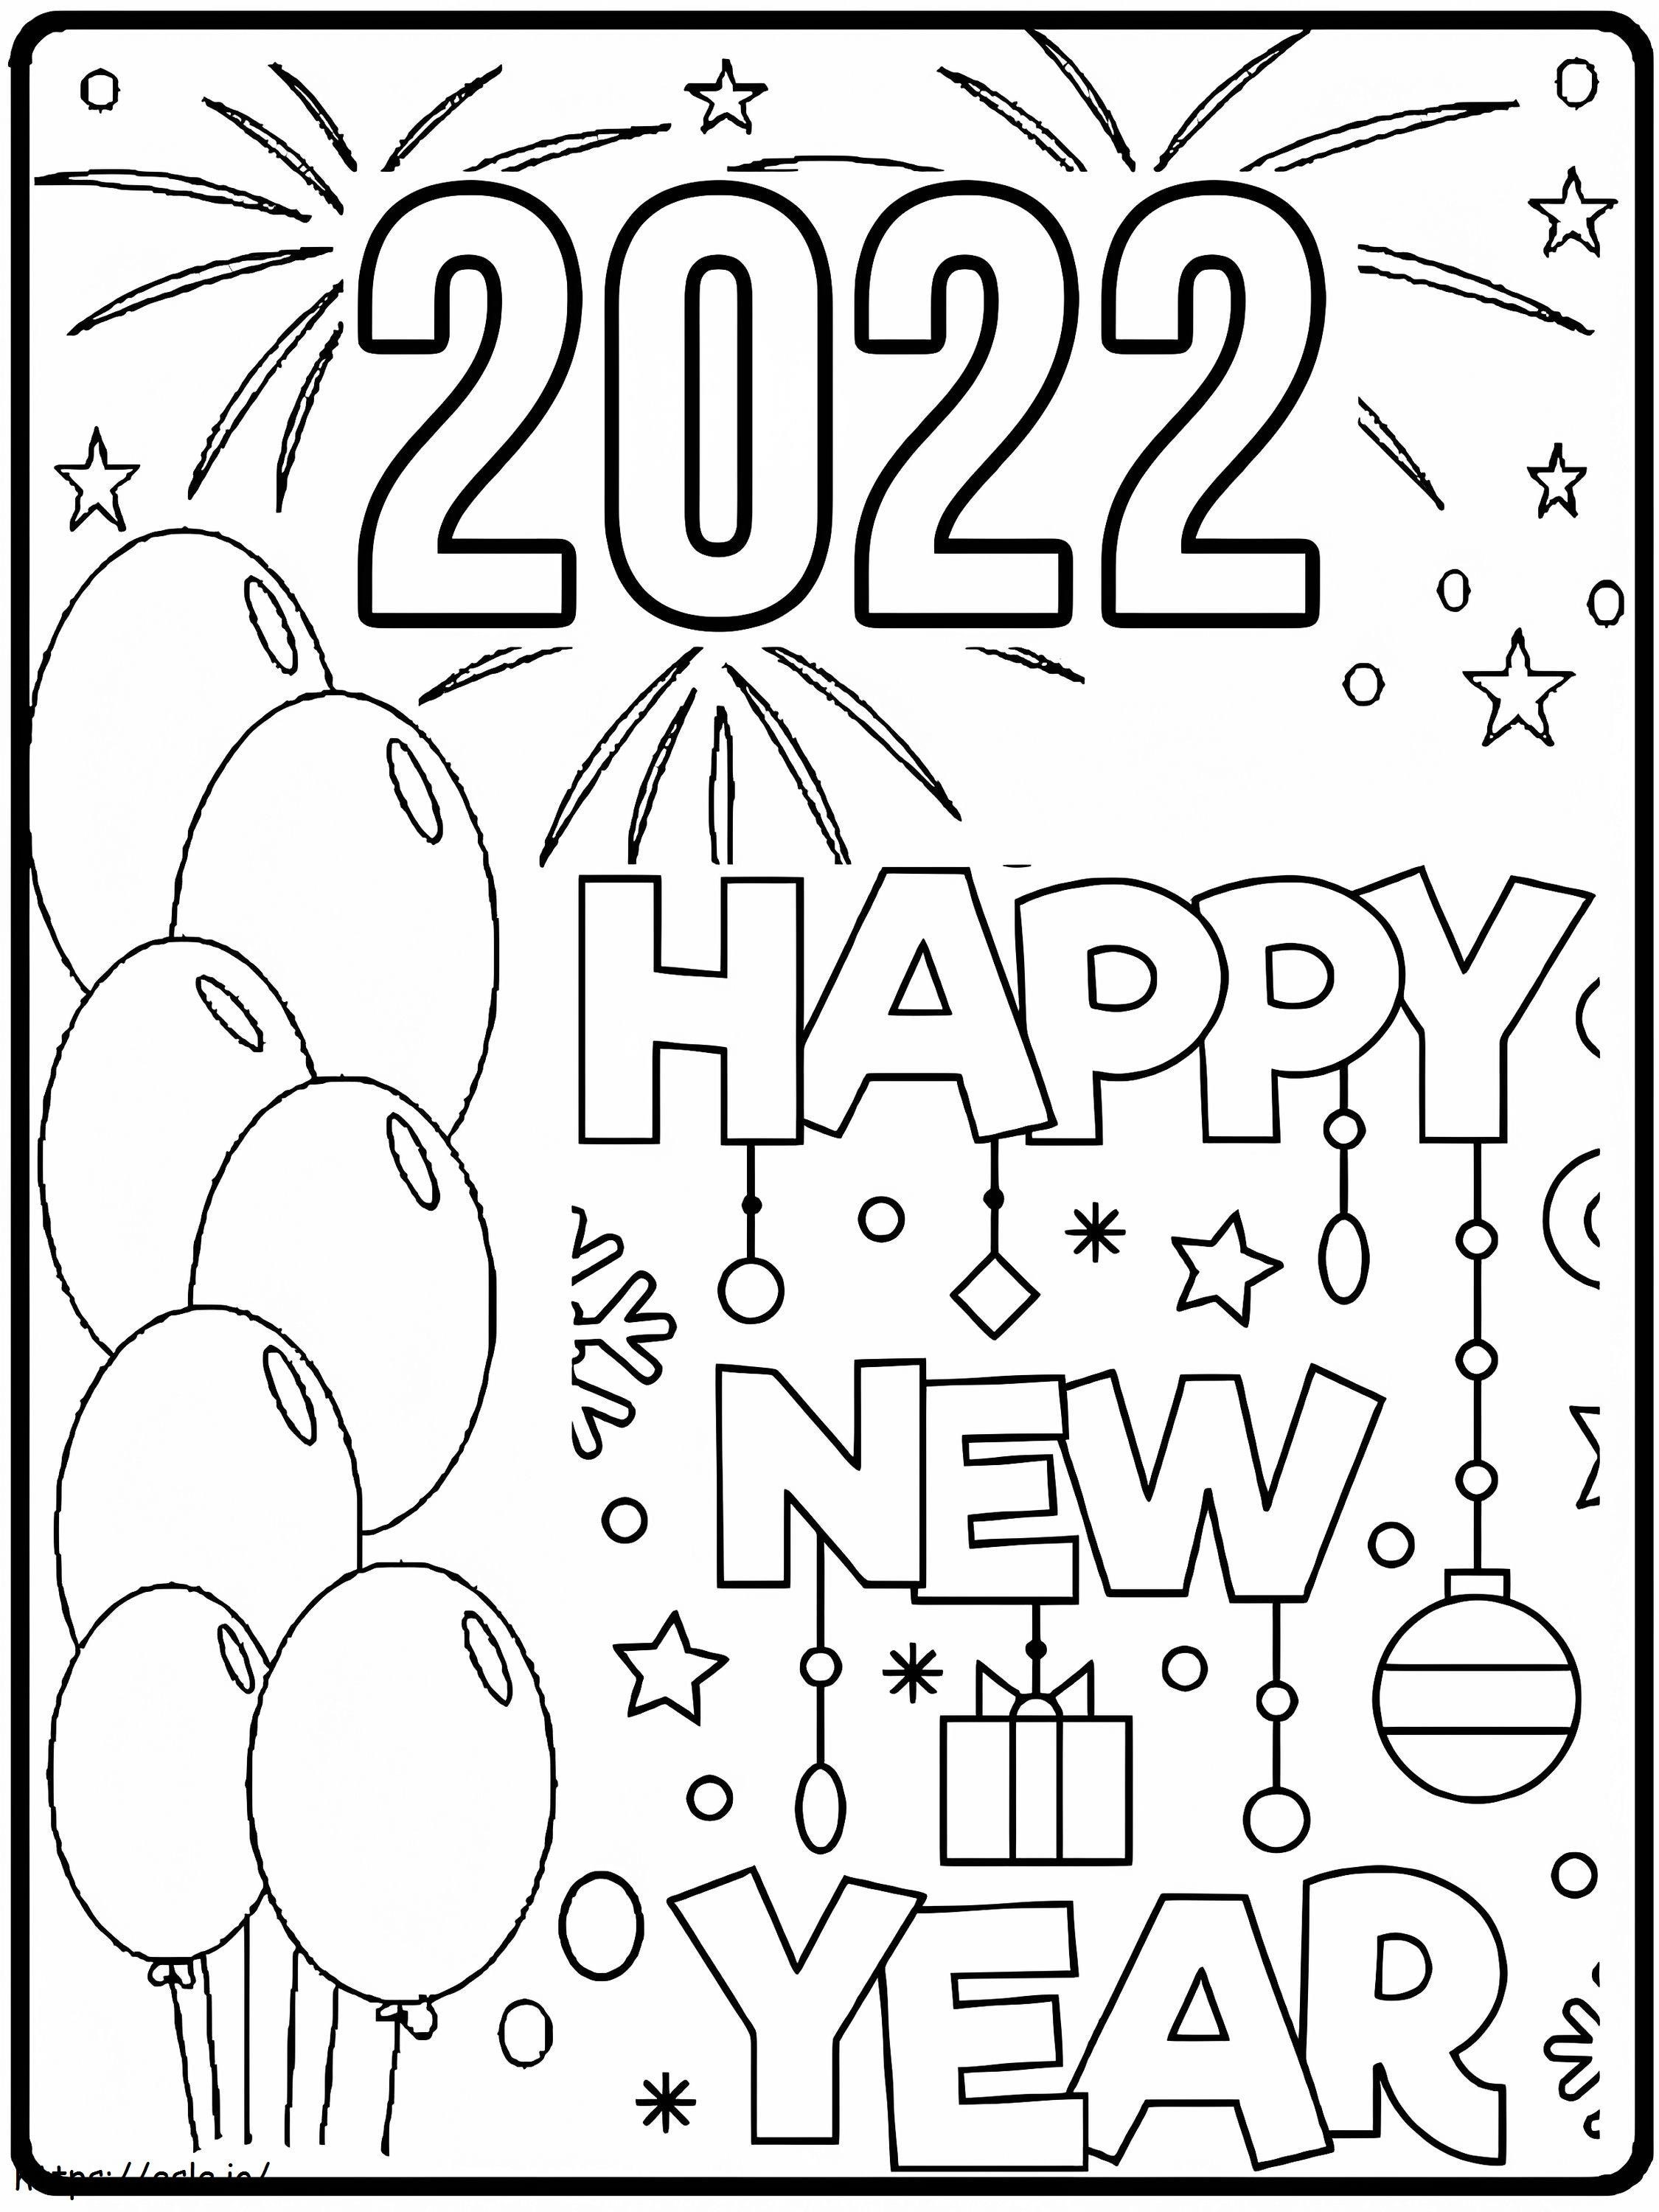 2022 New Year 3 coloring page